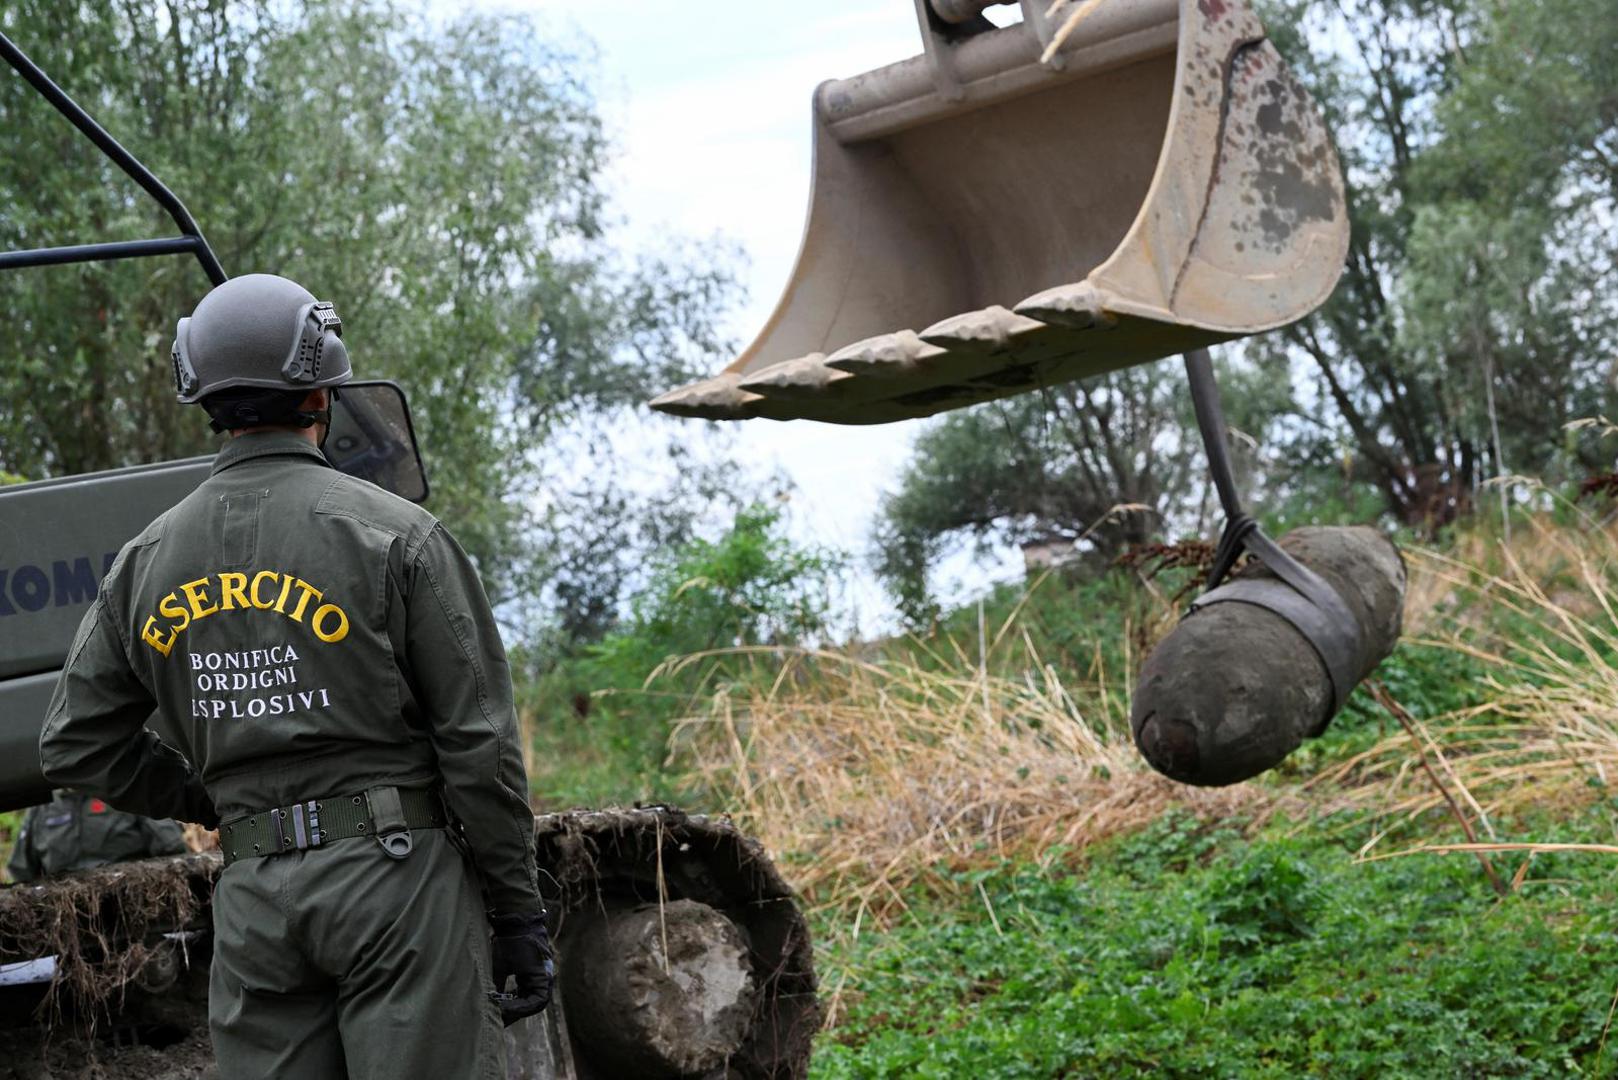 Members of the Italian army remove a World War Two bomb that was discovered in the dried-up River Po which has been suffering from the worst drought in 70 years, in Borgo Virgilio, Italy, August 7, 2022. REUTERS/Flavio Lo Scalzo Photo: FLAVIO LO SCALZO/REUTERS